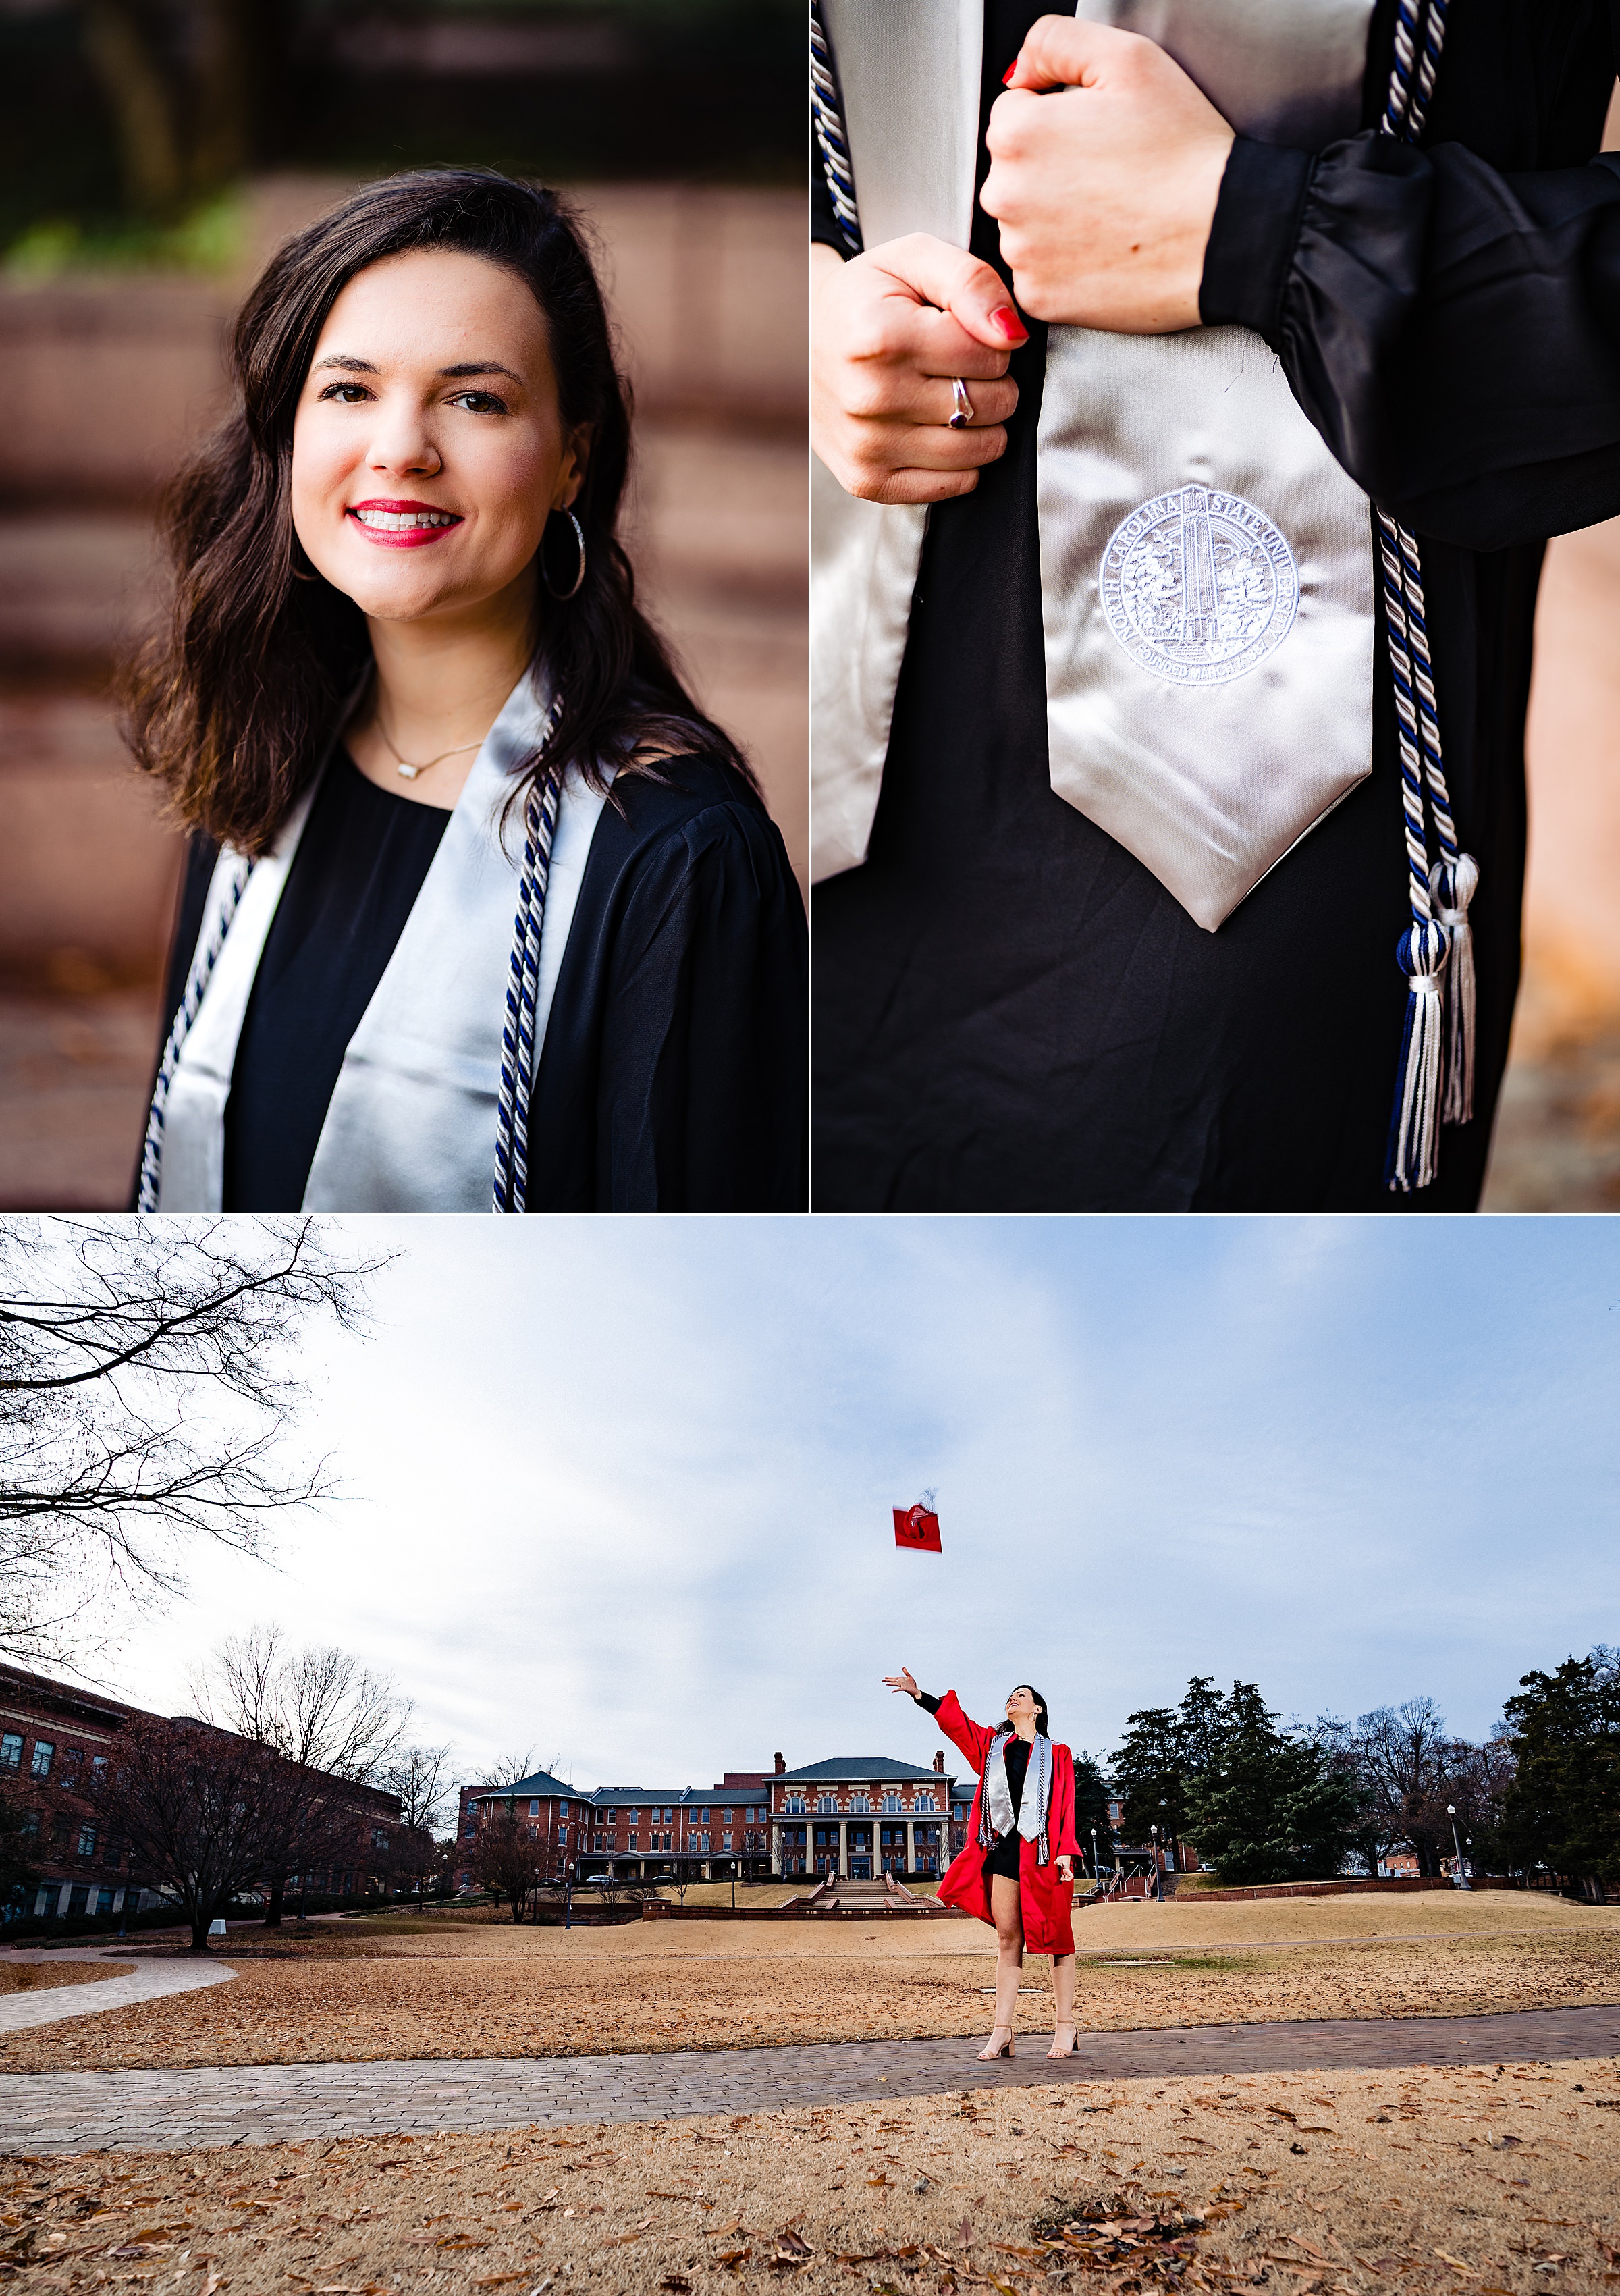 Collage of portraits of a female NC State Grad wearing a black dress with her graduation stole and red robe. In one photo she stands in the Court of Carolinas and tosses her red graduation cap | kivusandcamera.com